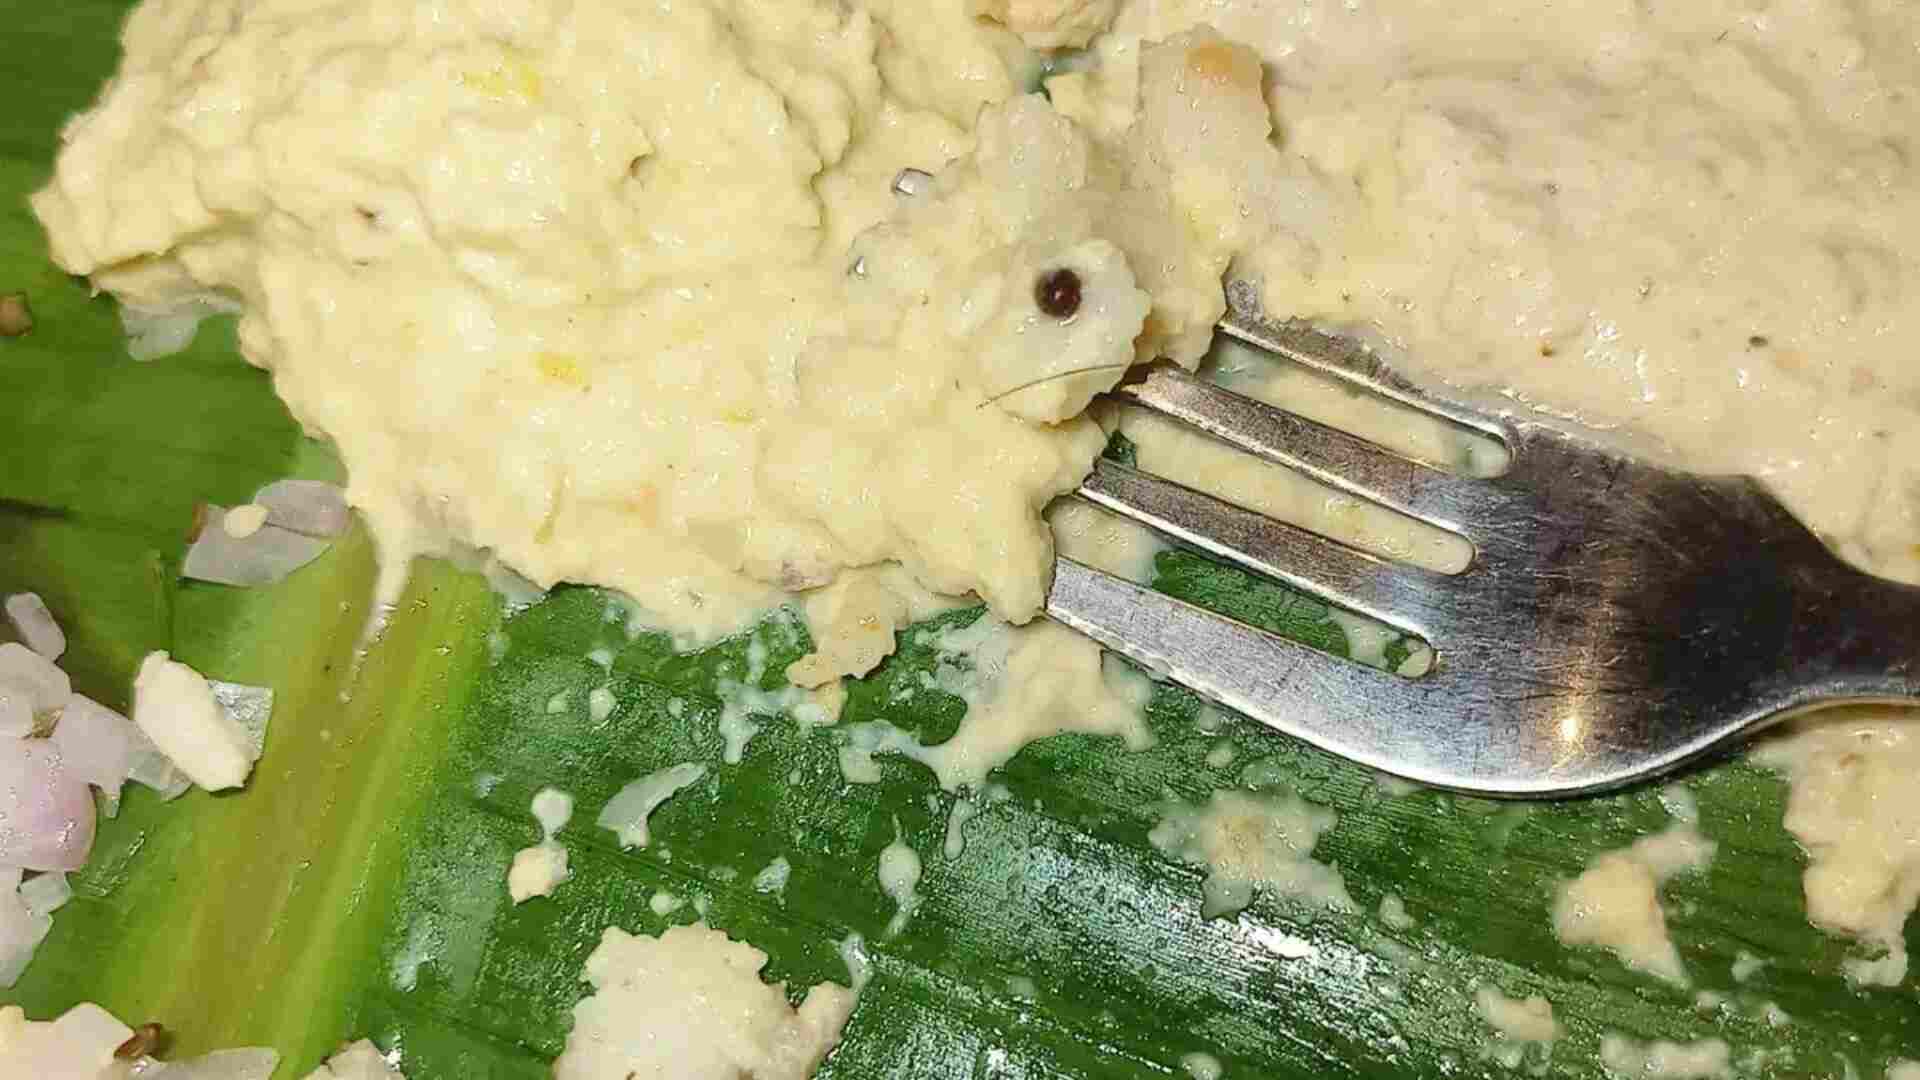 Hair Found In ‘Chutney’ At A Popular Eatery In Telangana